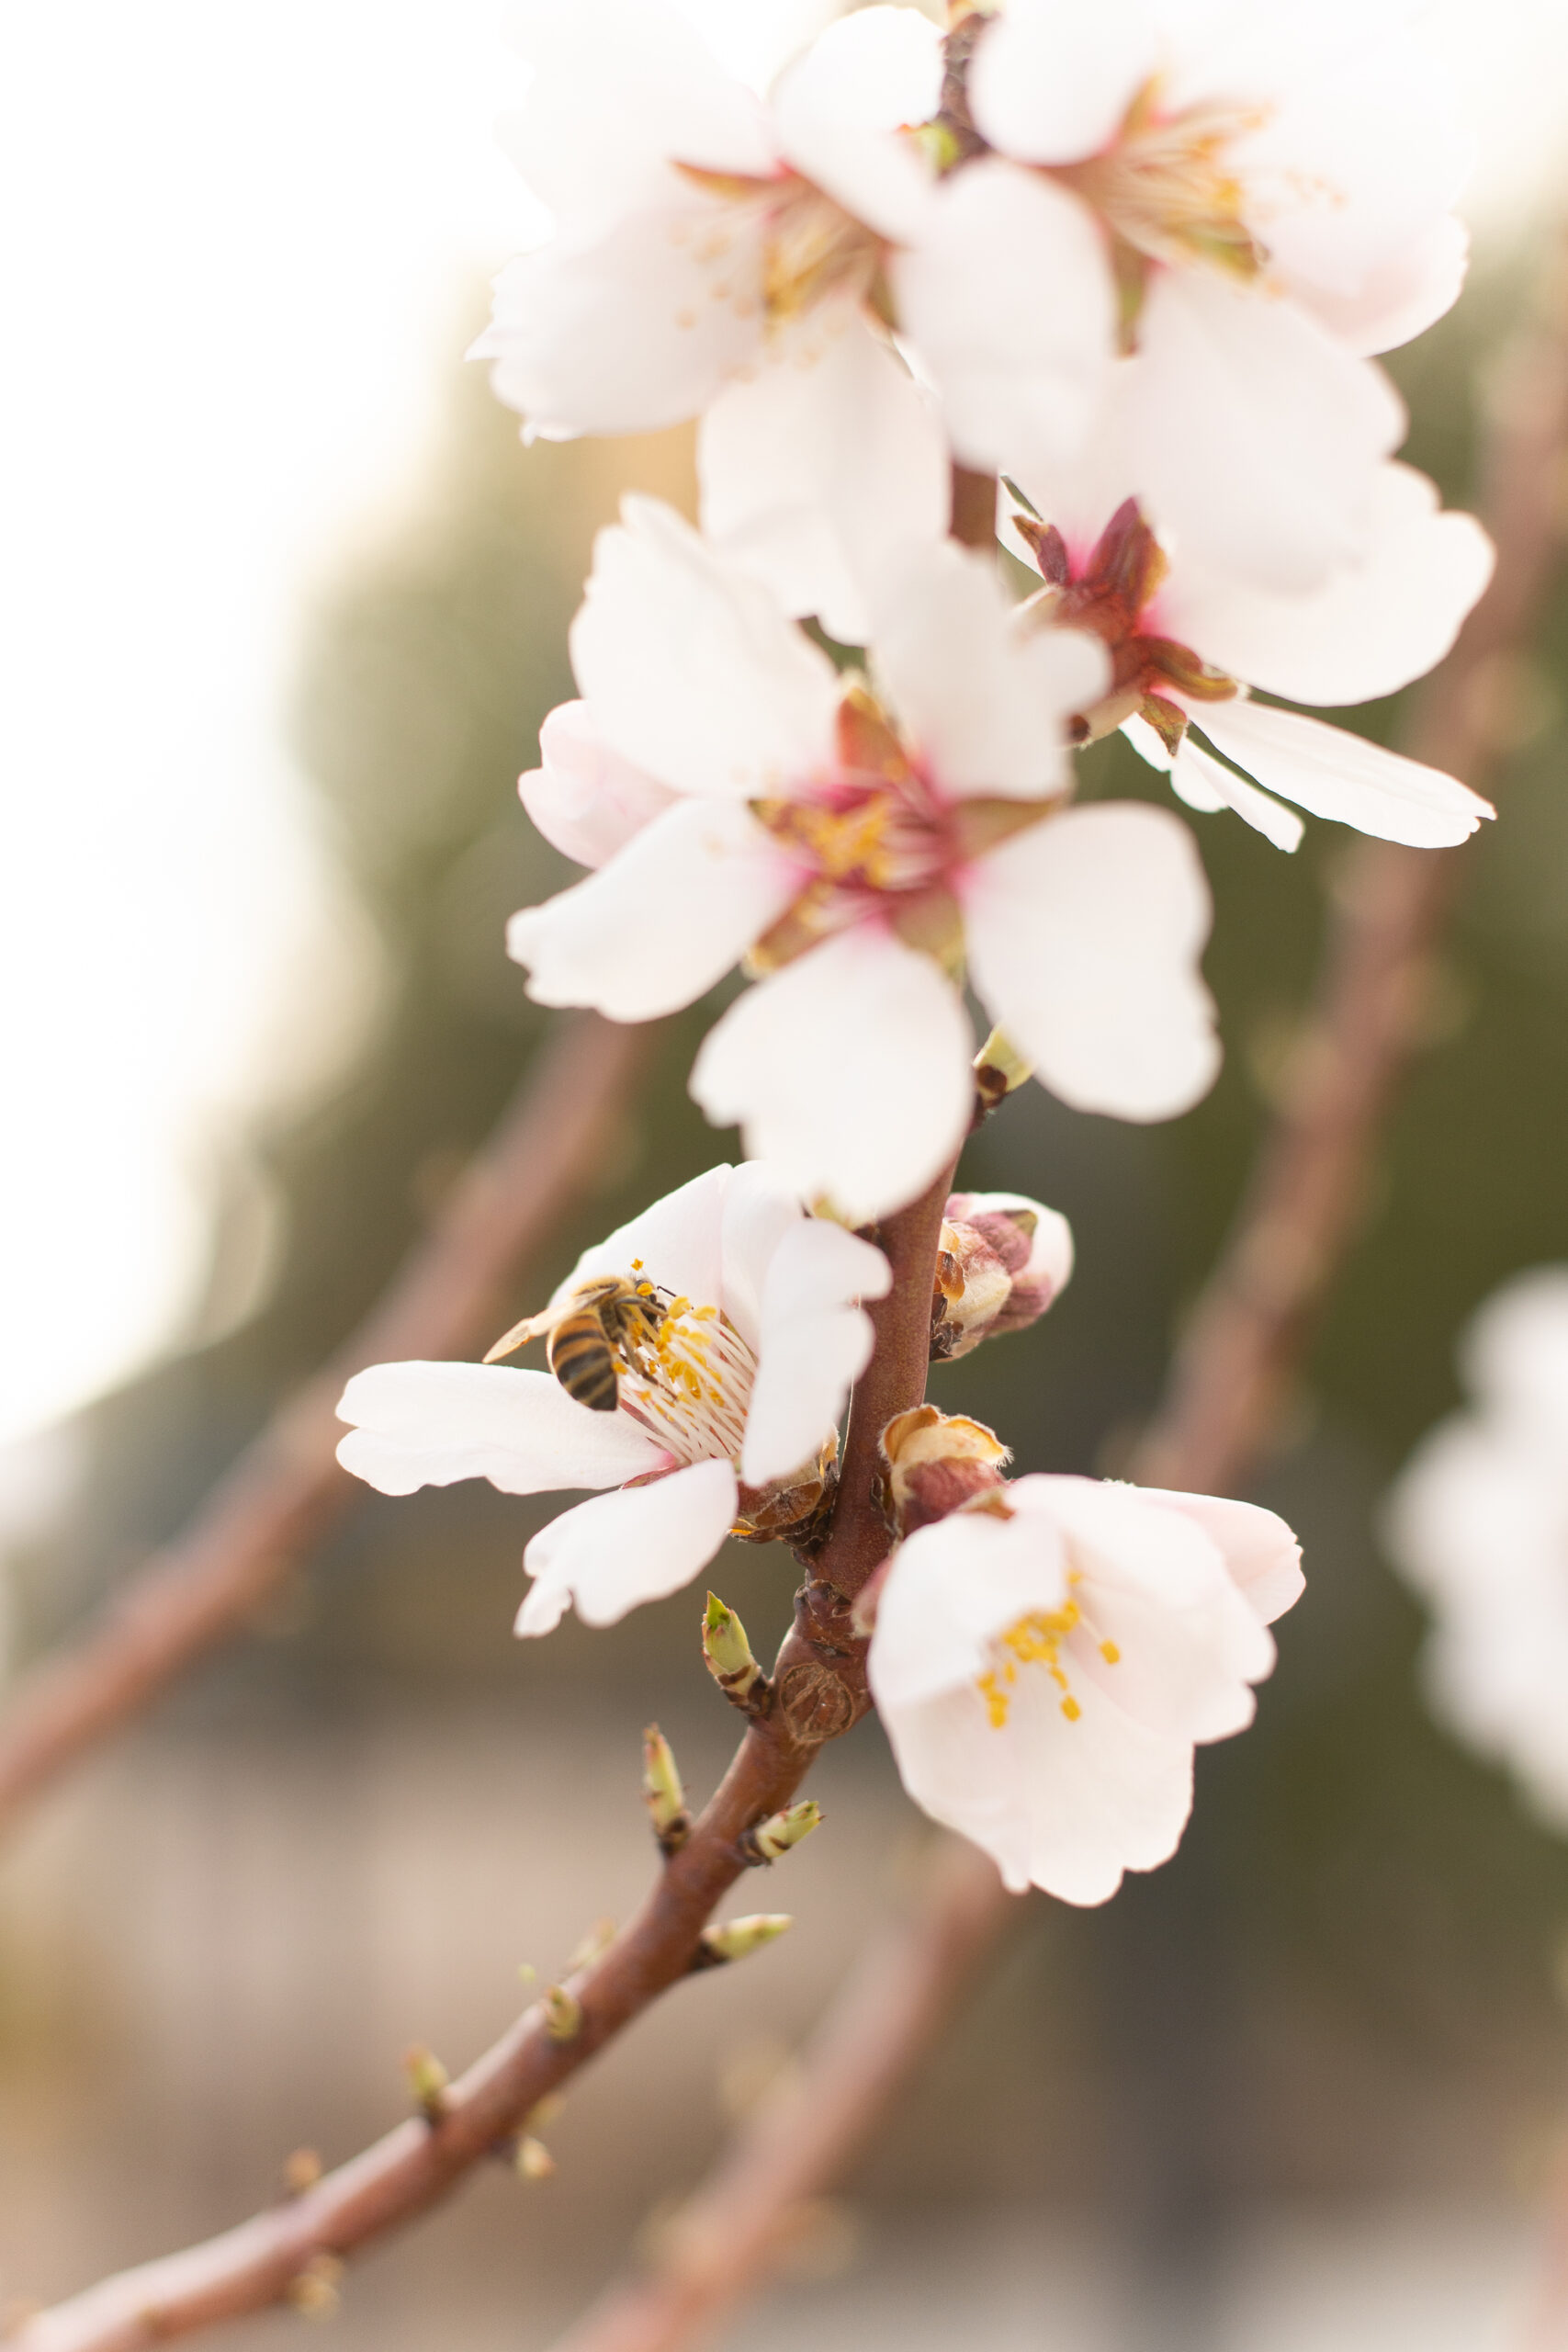 https://theprudenthomemaker.com/wp-content/uploads/2023/02/February-Almond-Blossoms-with-bee-The-Prudent-Homemaker-scaled.jpg